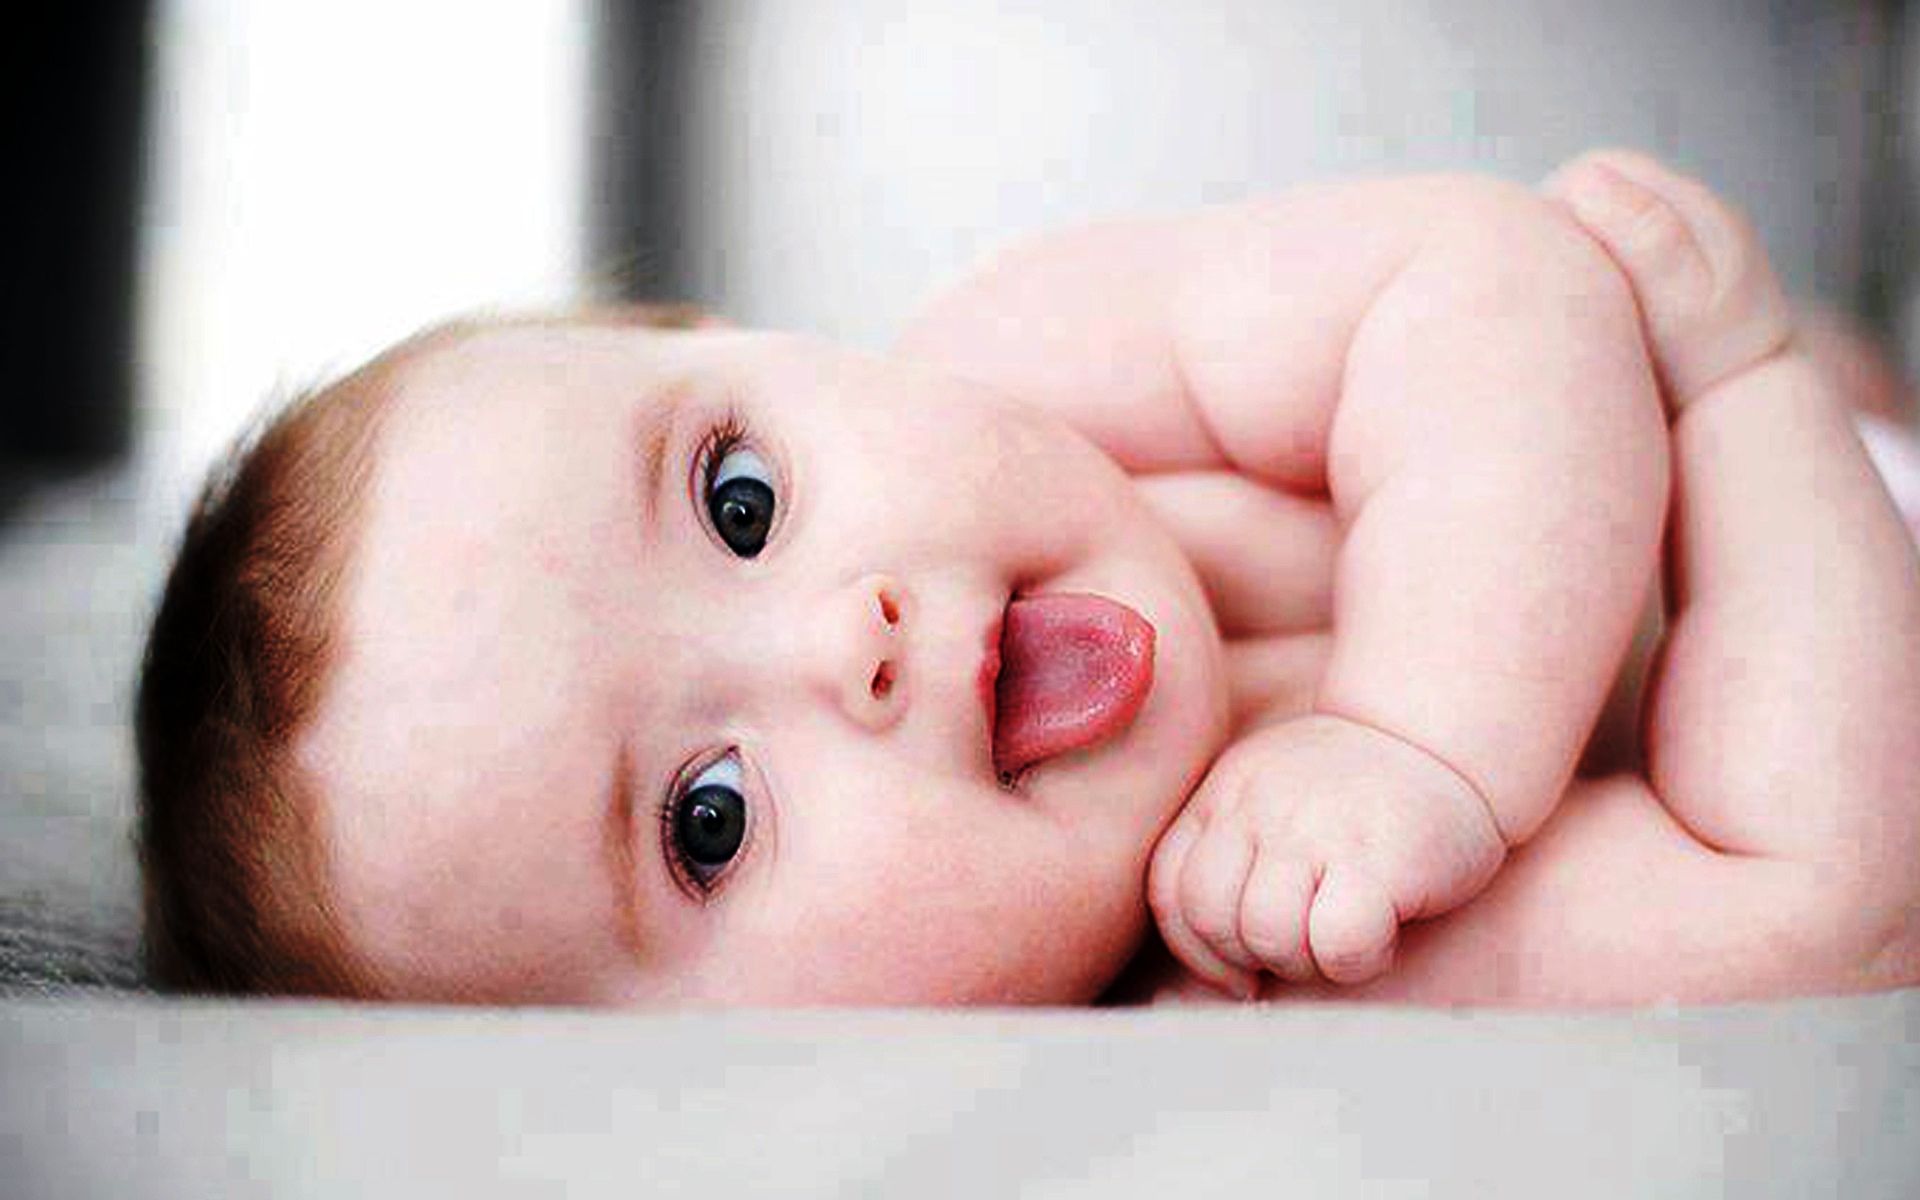 Baby Pictures, Images - CommentsDB.com - Page 7 | Cute babies ...